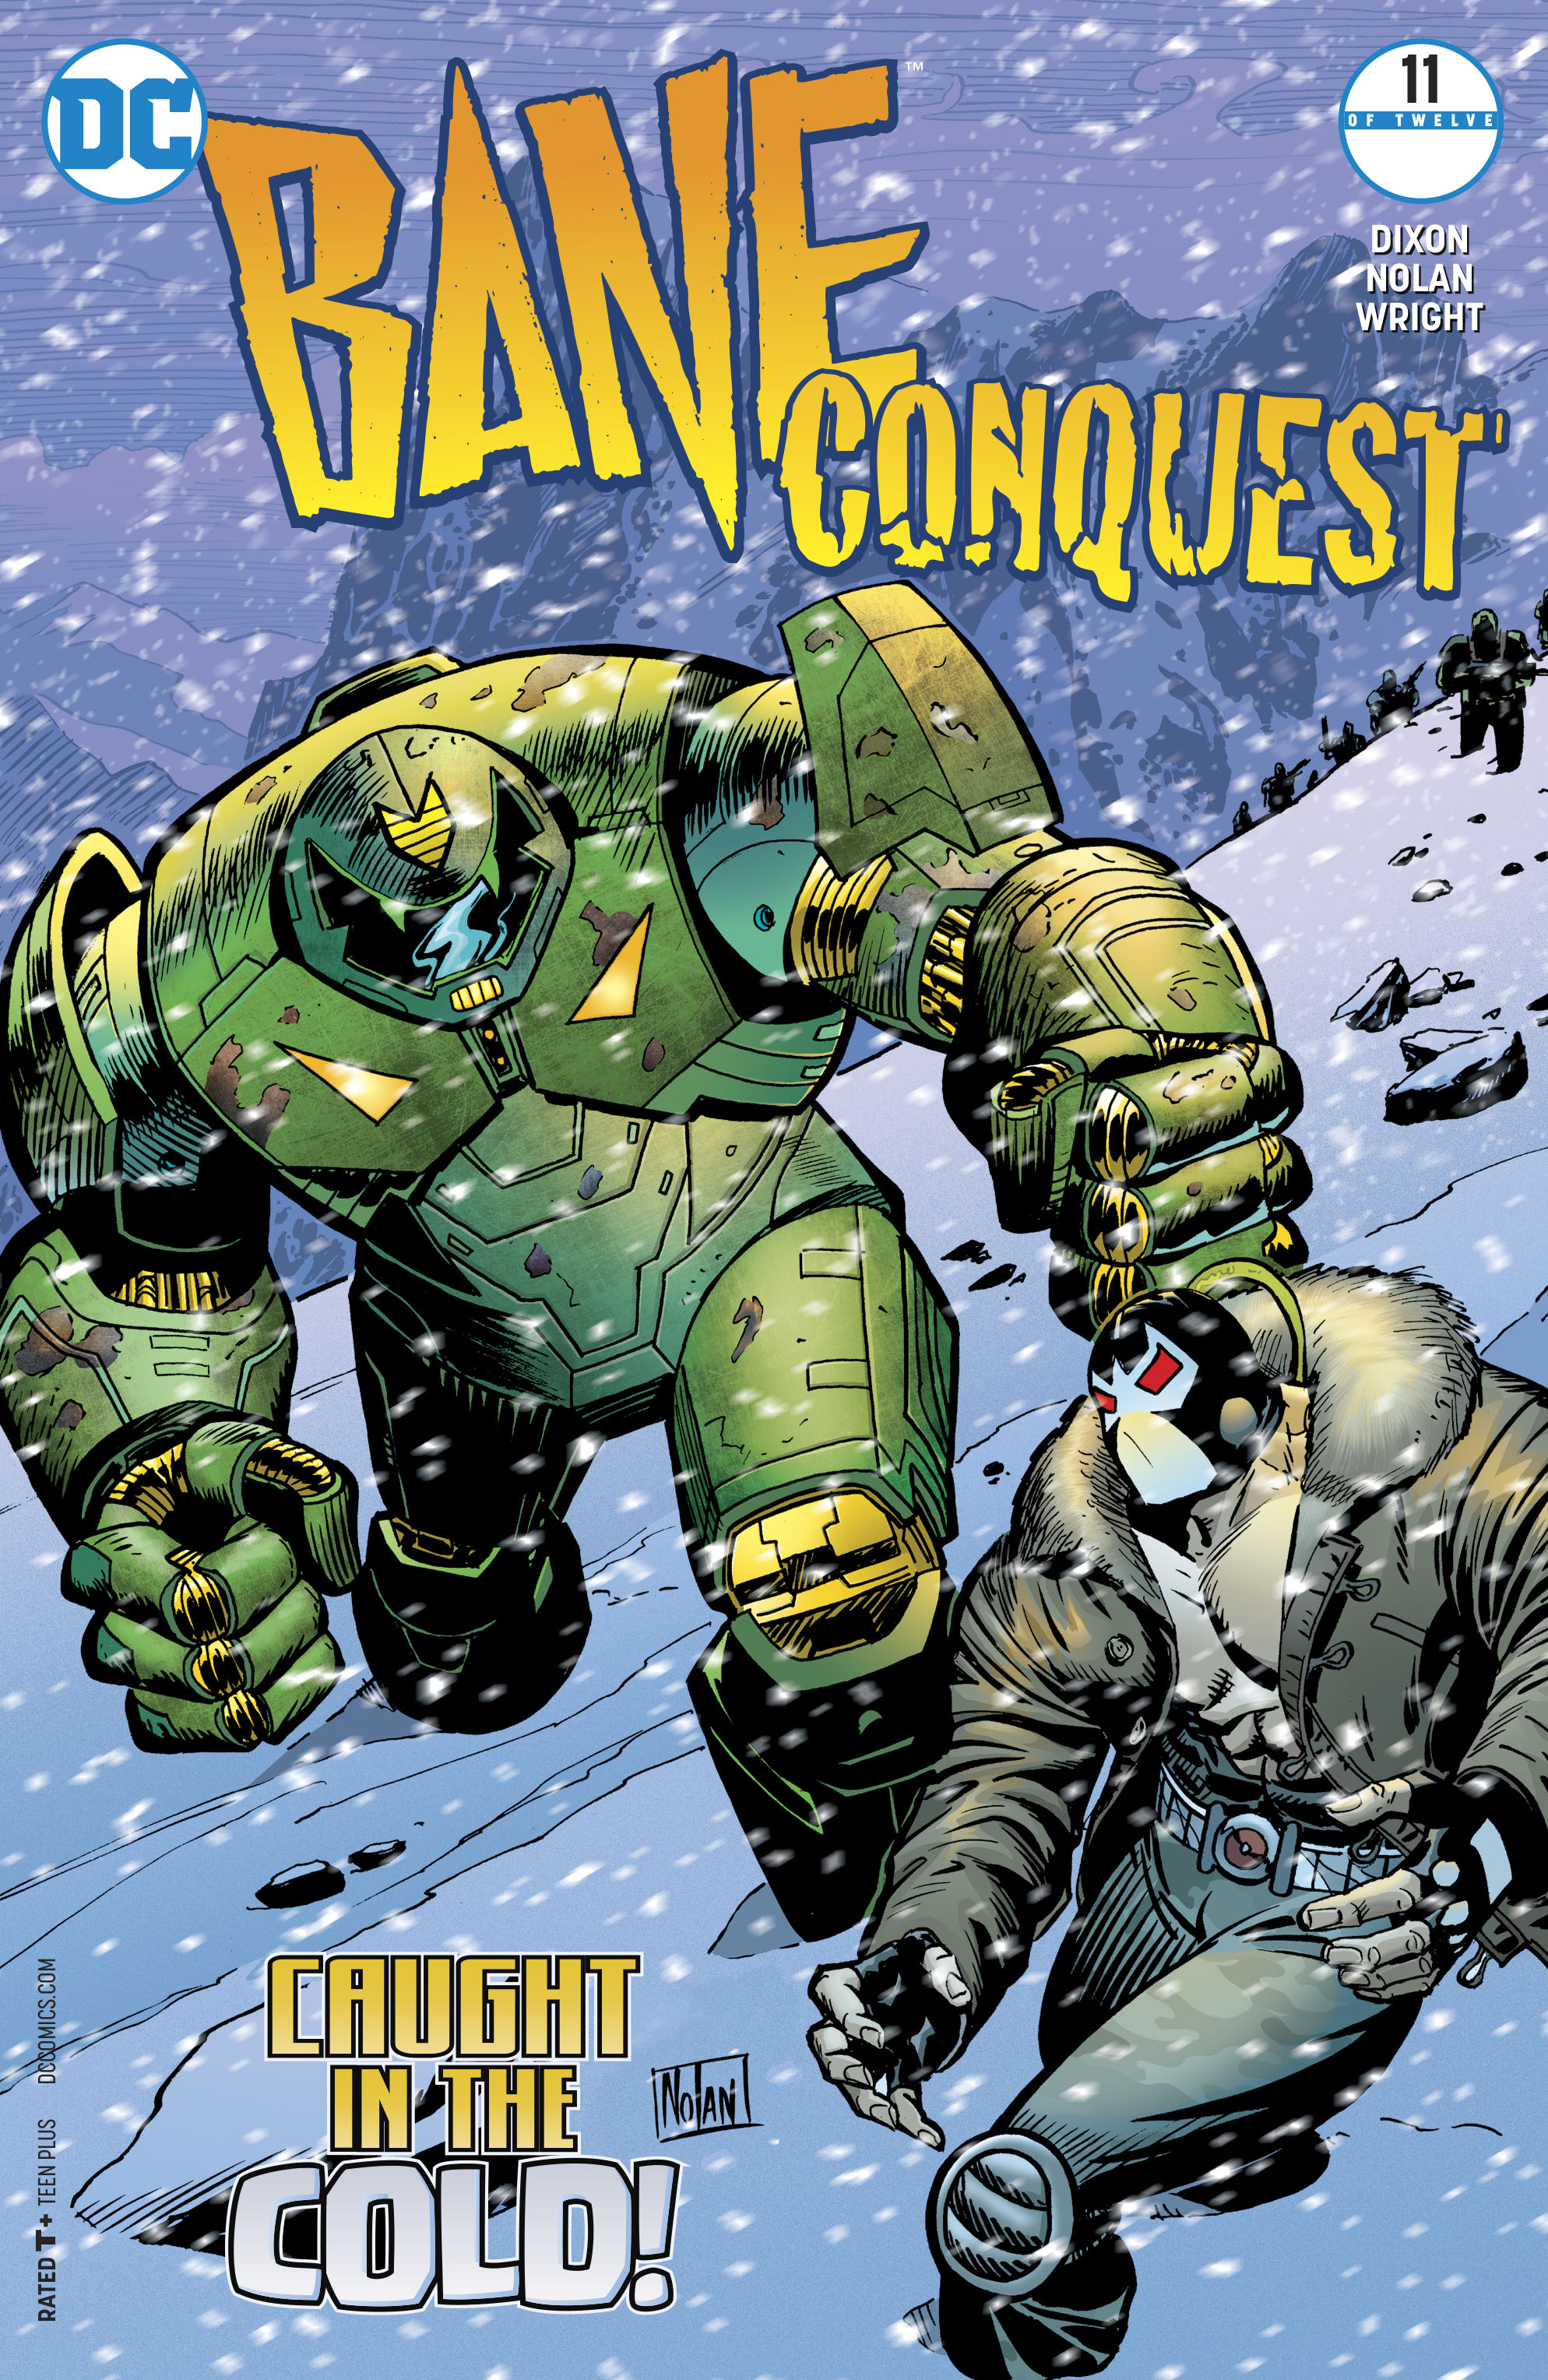 BANE CONQUEST #11 (OF 12)